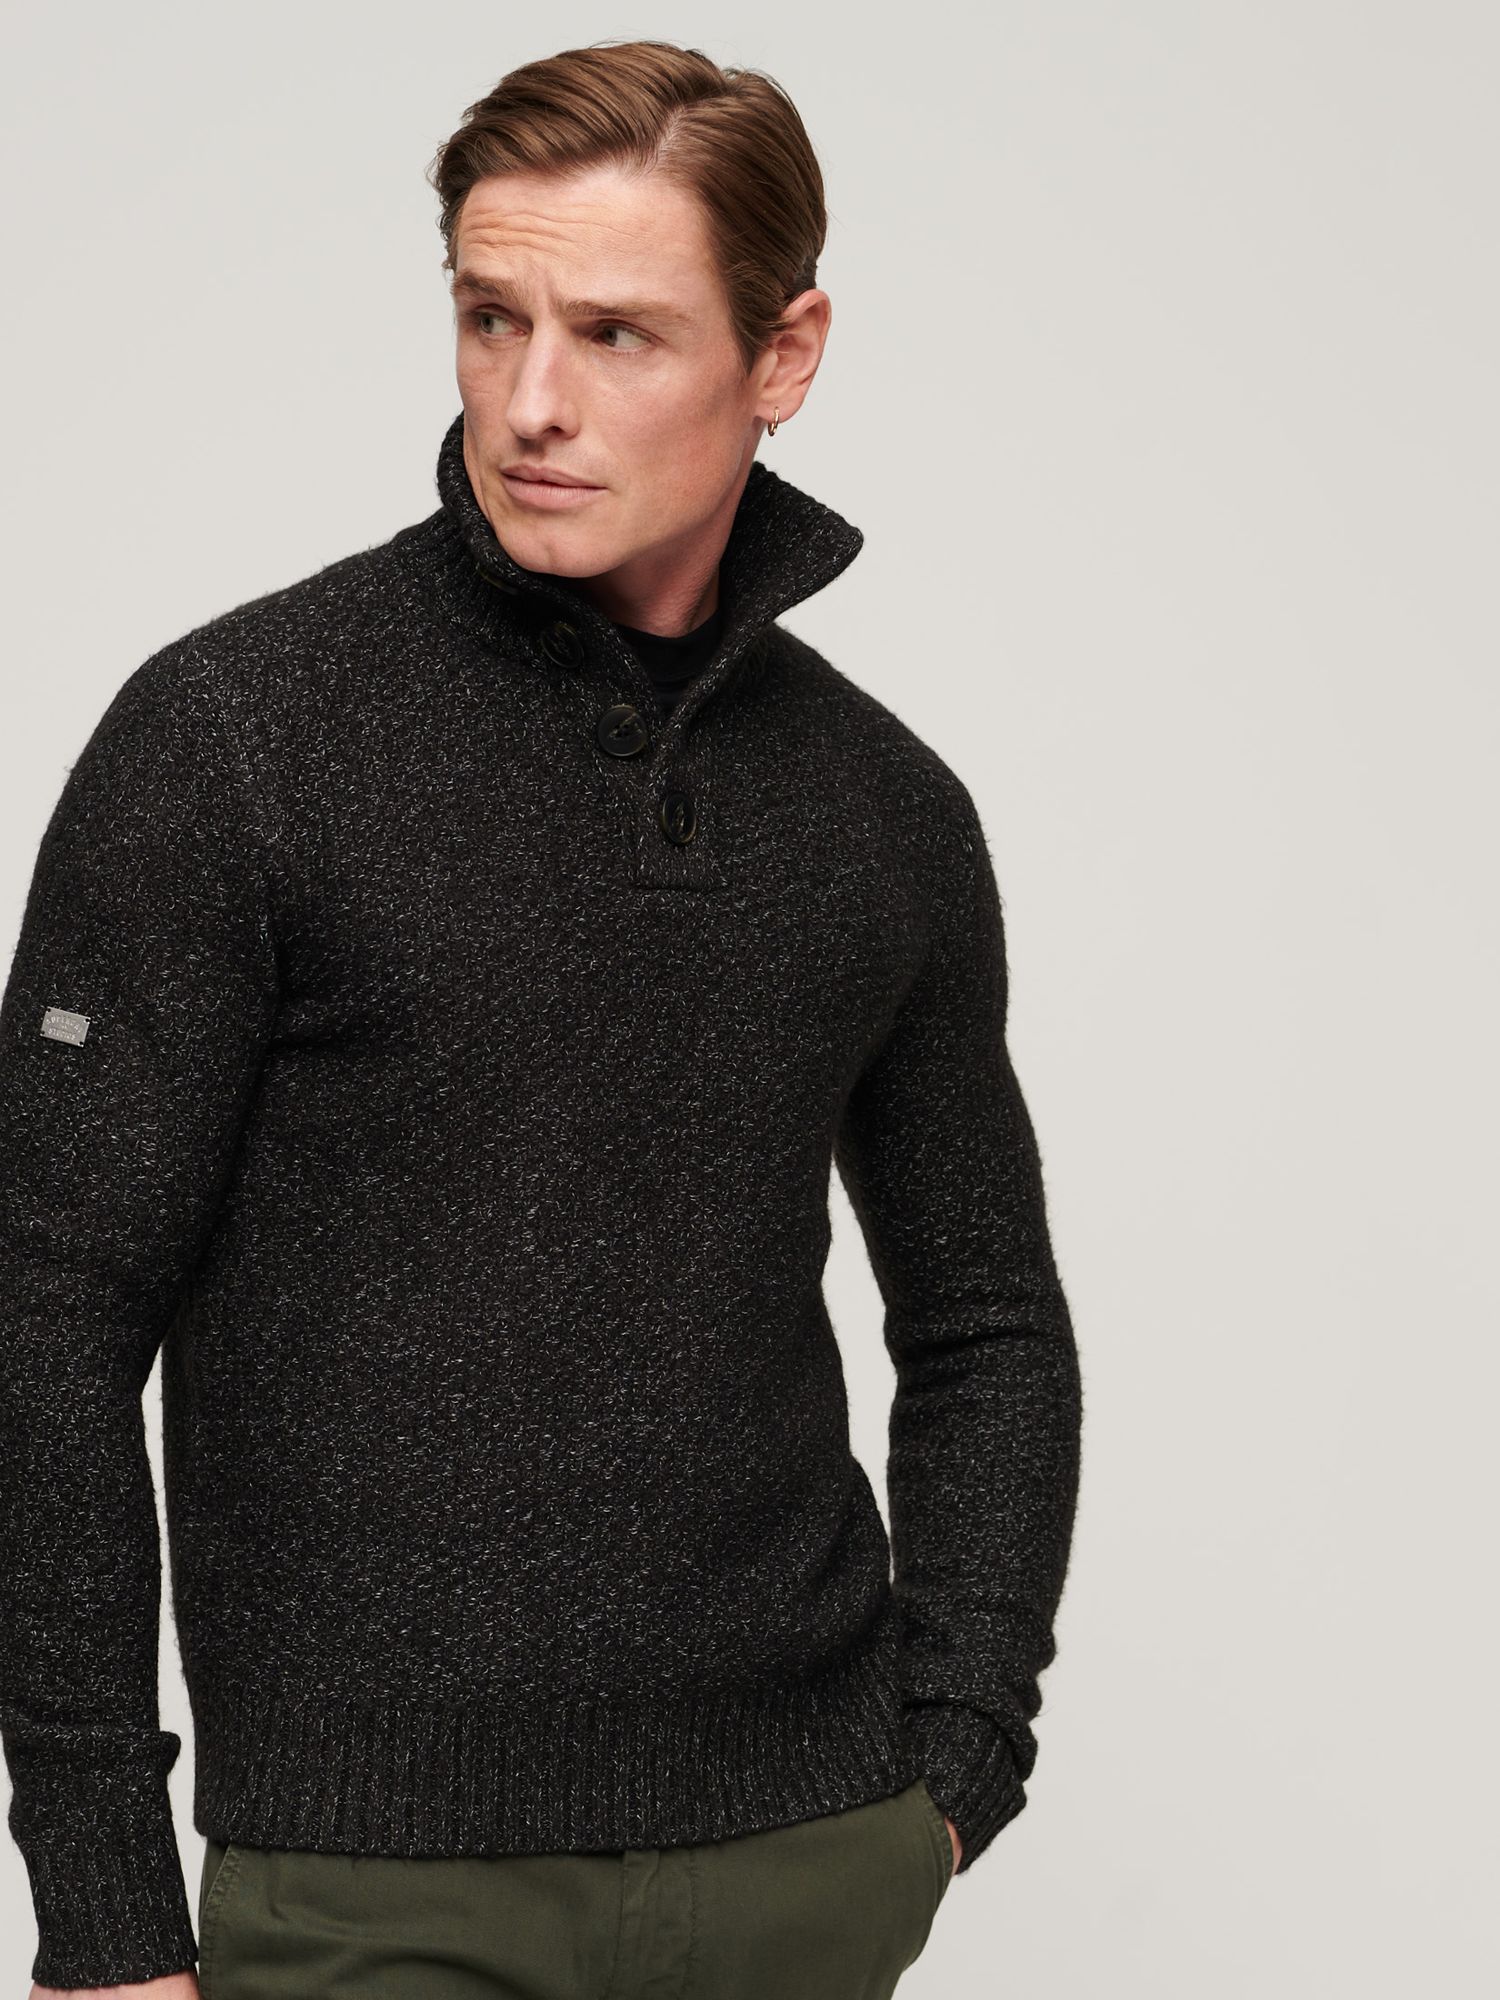 Superdry Chunky Button High Neck Jumper, Black at John Lewis & Partners